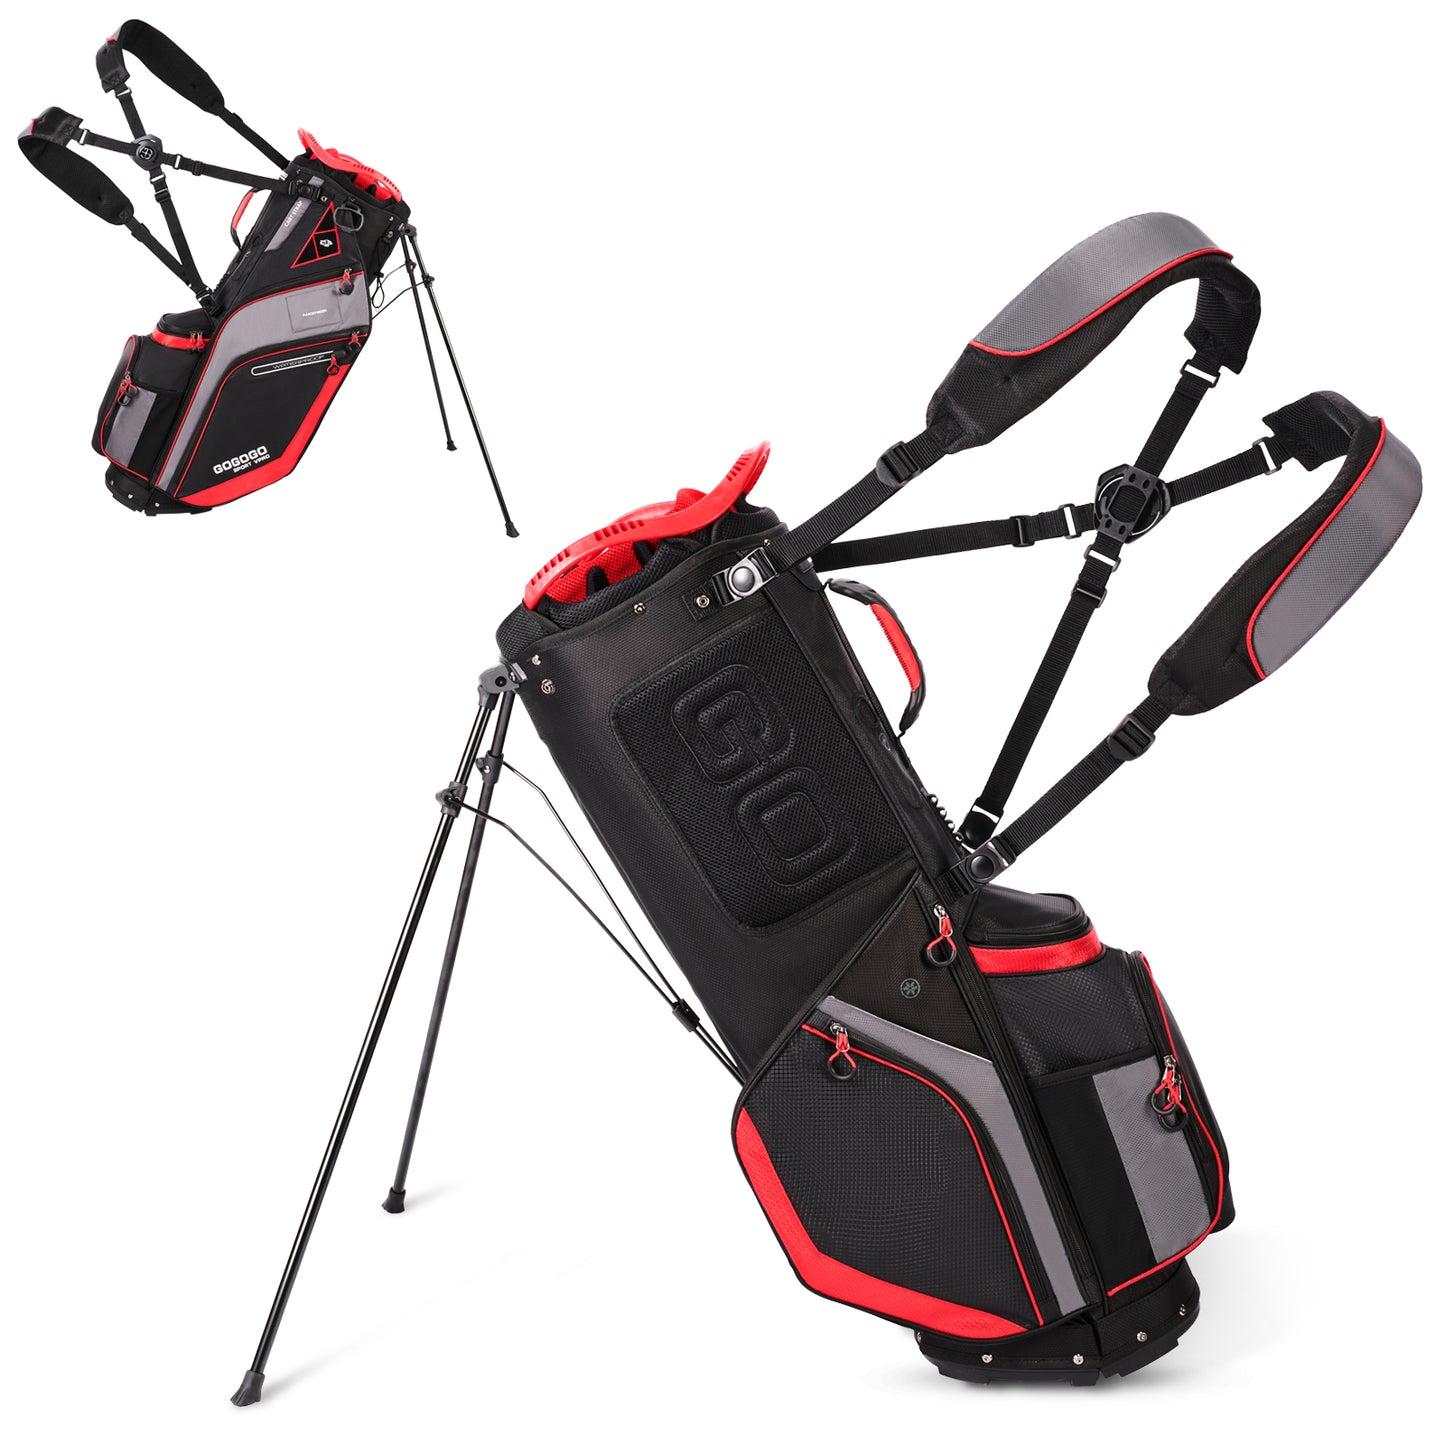 Gogogo Sport Vpro Golf Stand Bag 14 Way Top Full Length Dividers -Lightweight with Rain Cover